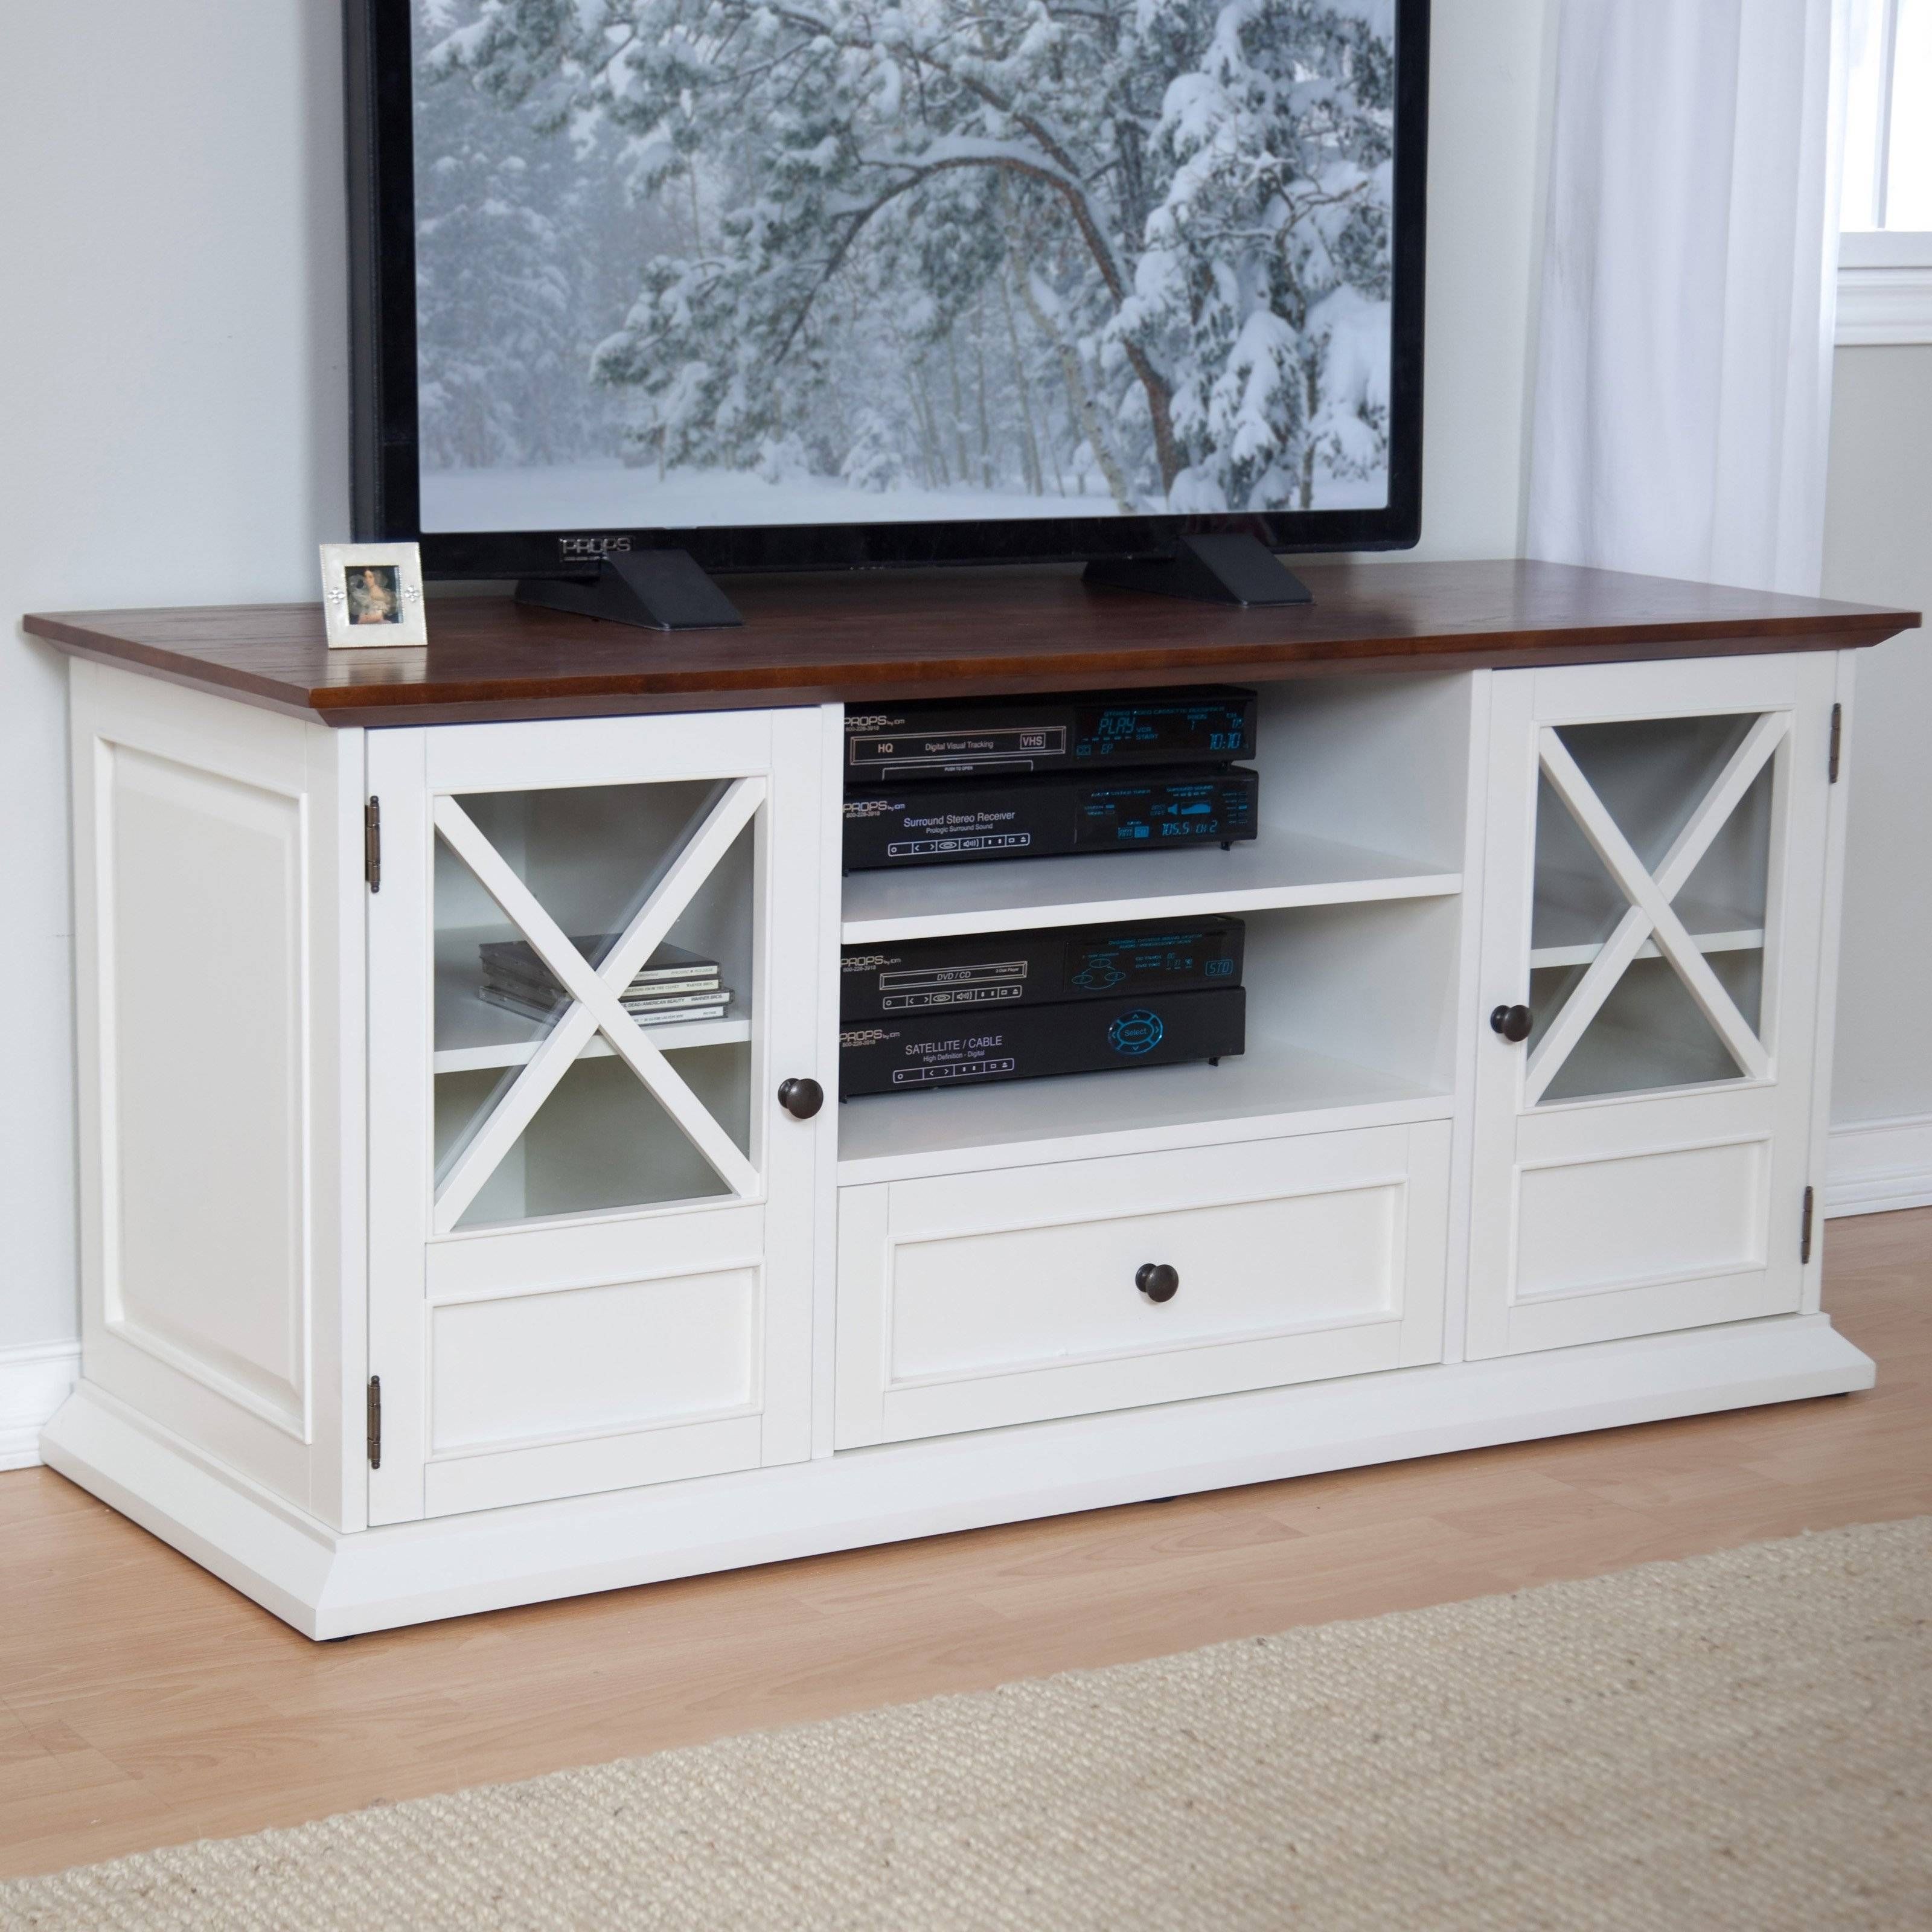 Belham Living Hampton Tv Stand – White/oak | Hayneedle Within Cabinet Tv Stands (View 4 of 15)